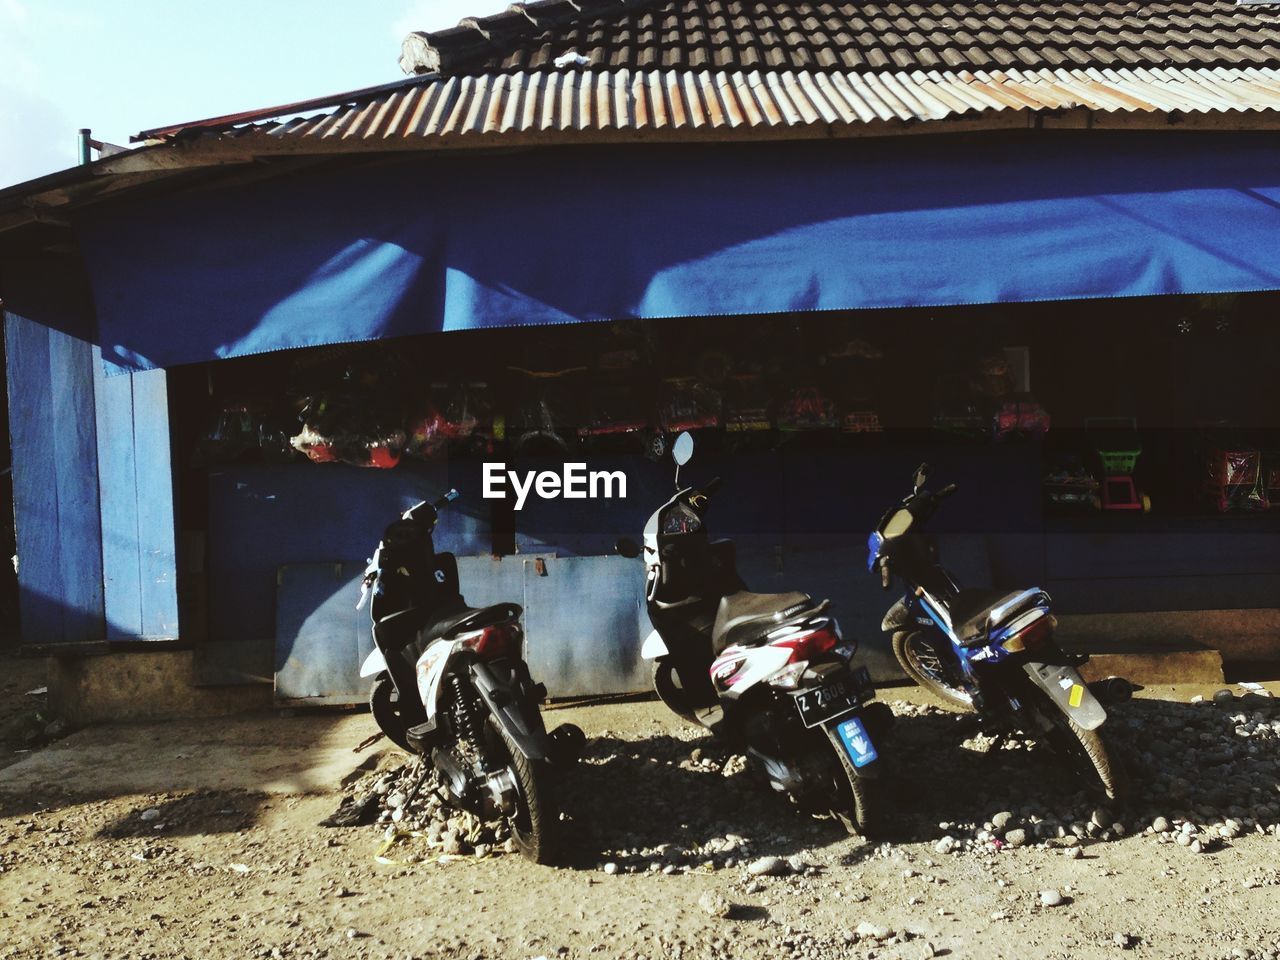 Motorbikes parked in front of a store